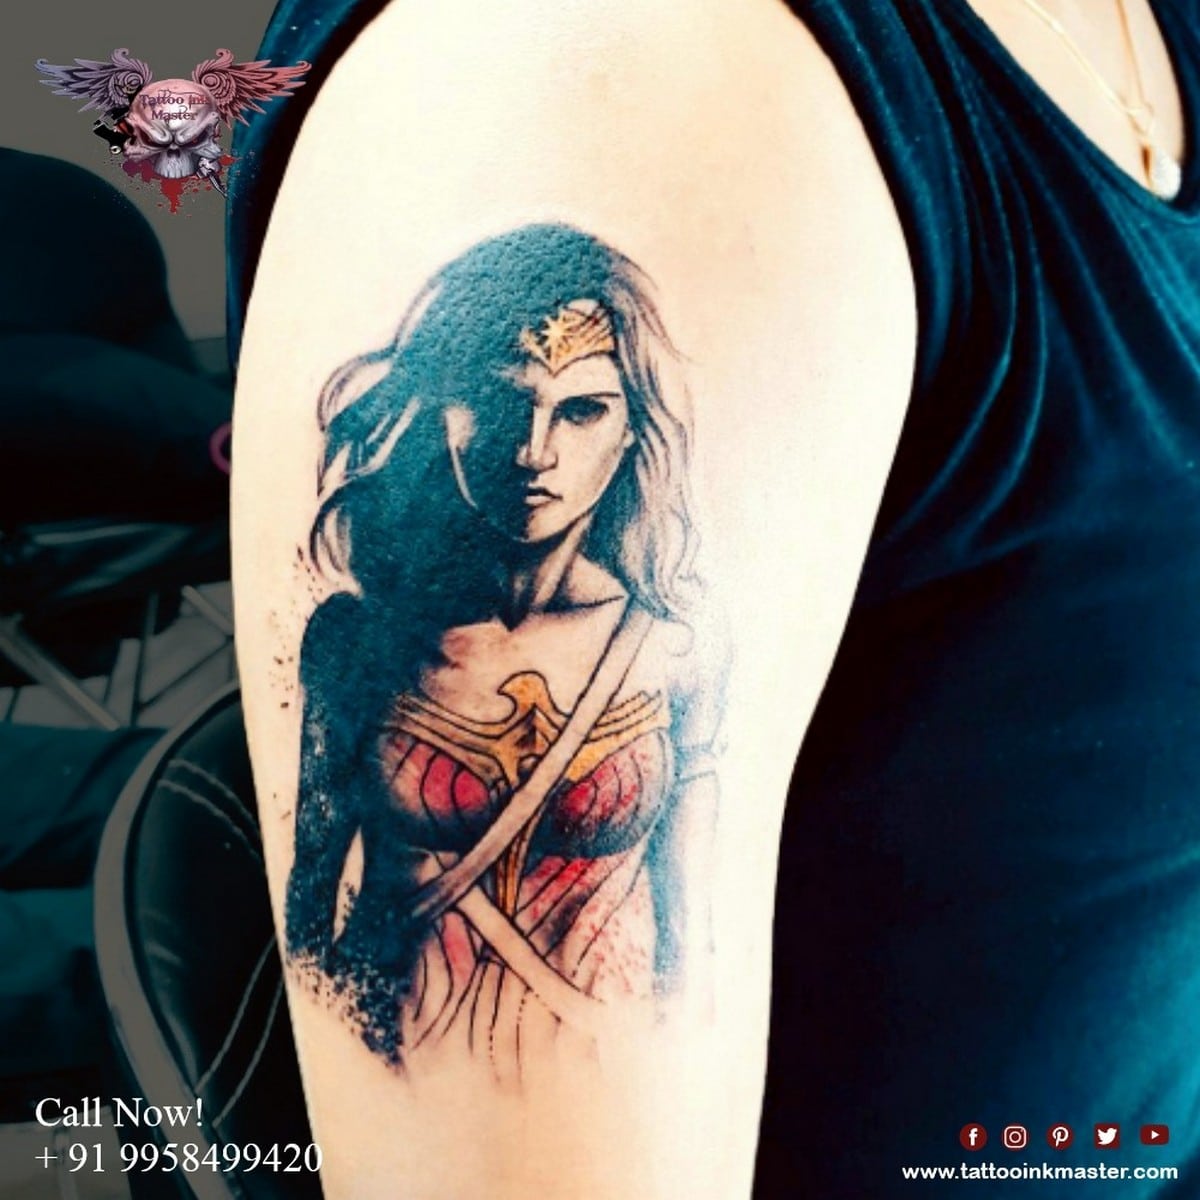 Tattoo tagged with: wonder woman logo, feminist, small, brand, ifttt,  little, wonder woman, pop art, tiny, dc comics character, inner forearm,  logo, other, fine line, fictional character, patriotic, line art,  wickynicky, contemporary,